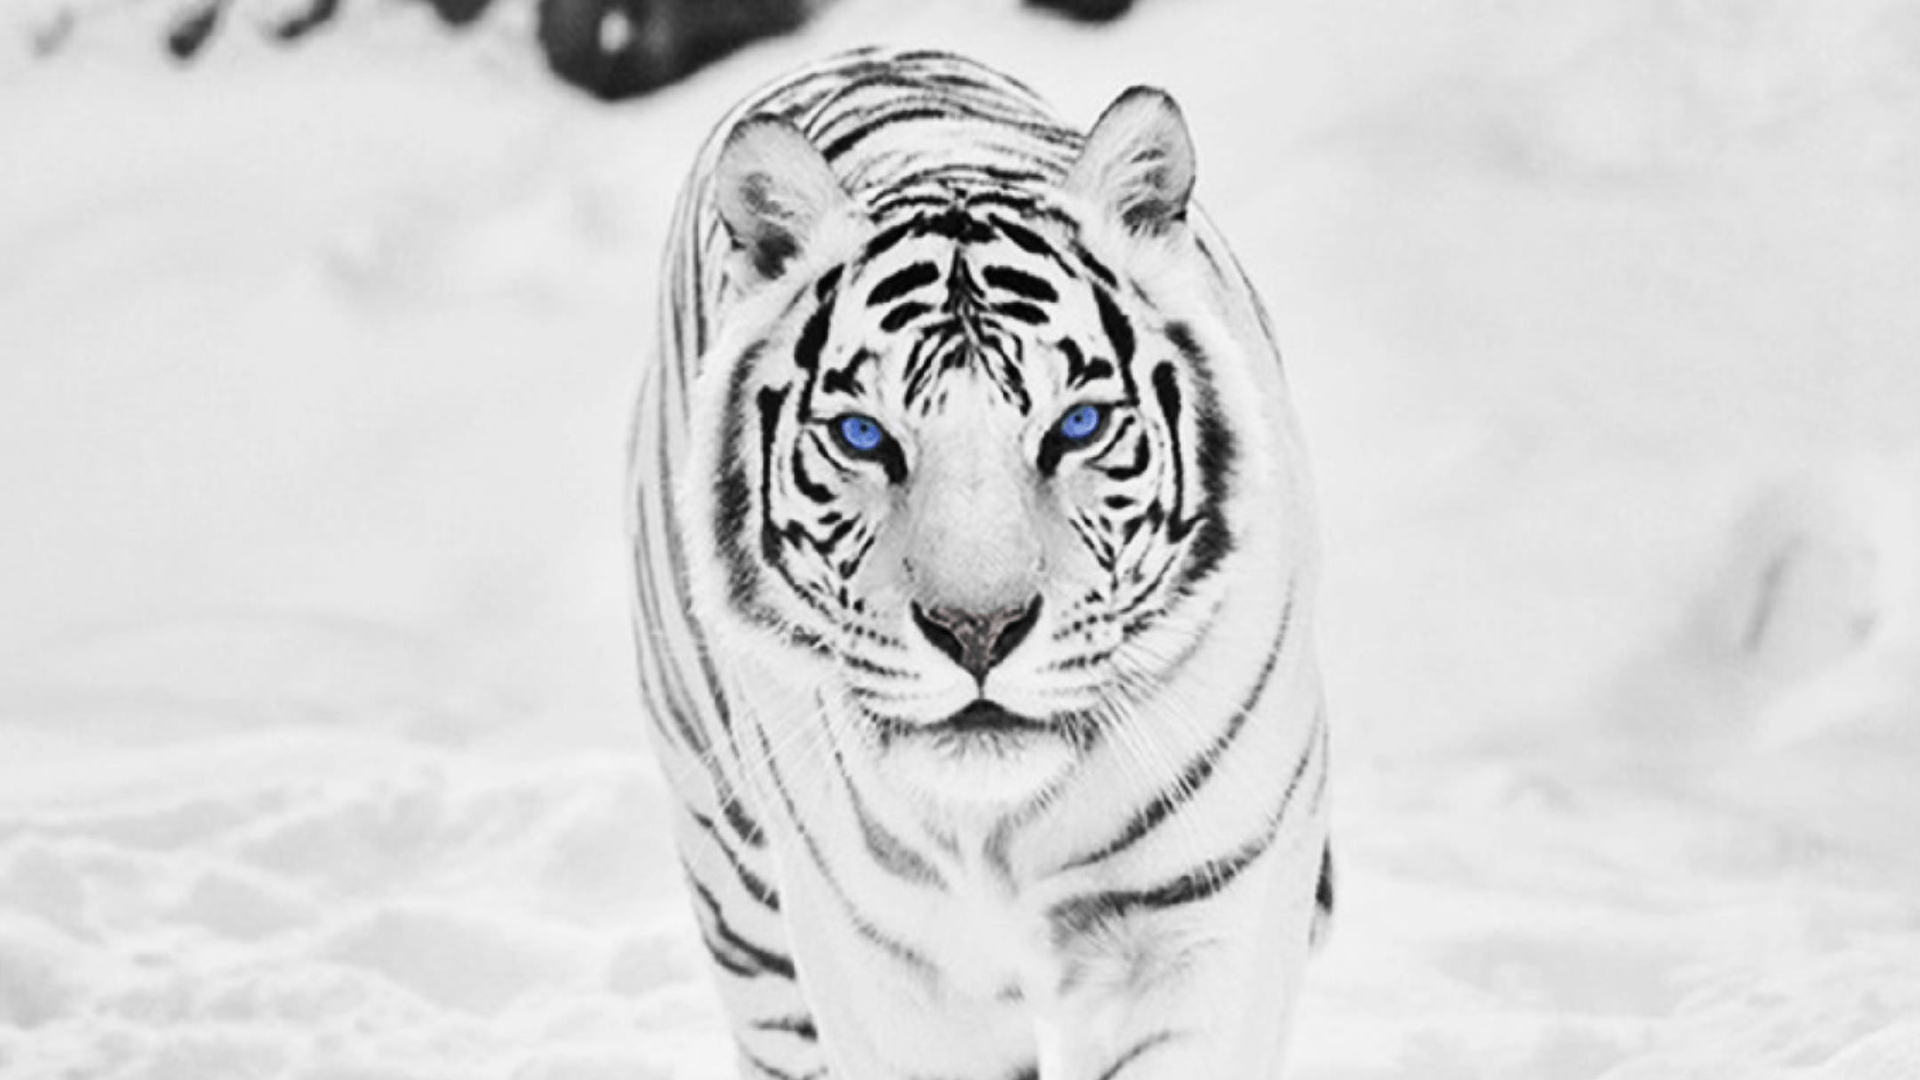 White Tiger Wallpaper Backgrounds Free Download > SubWallpapers